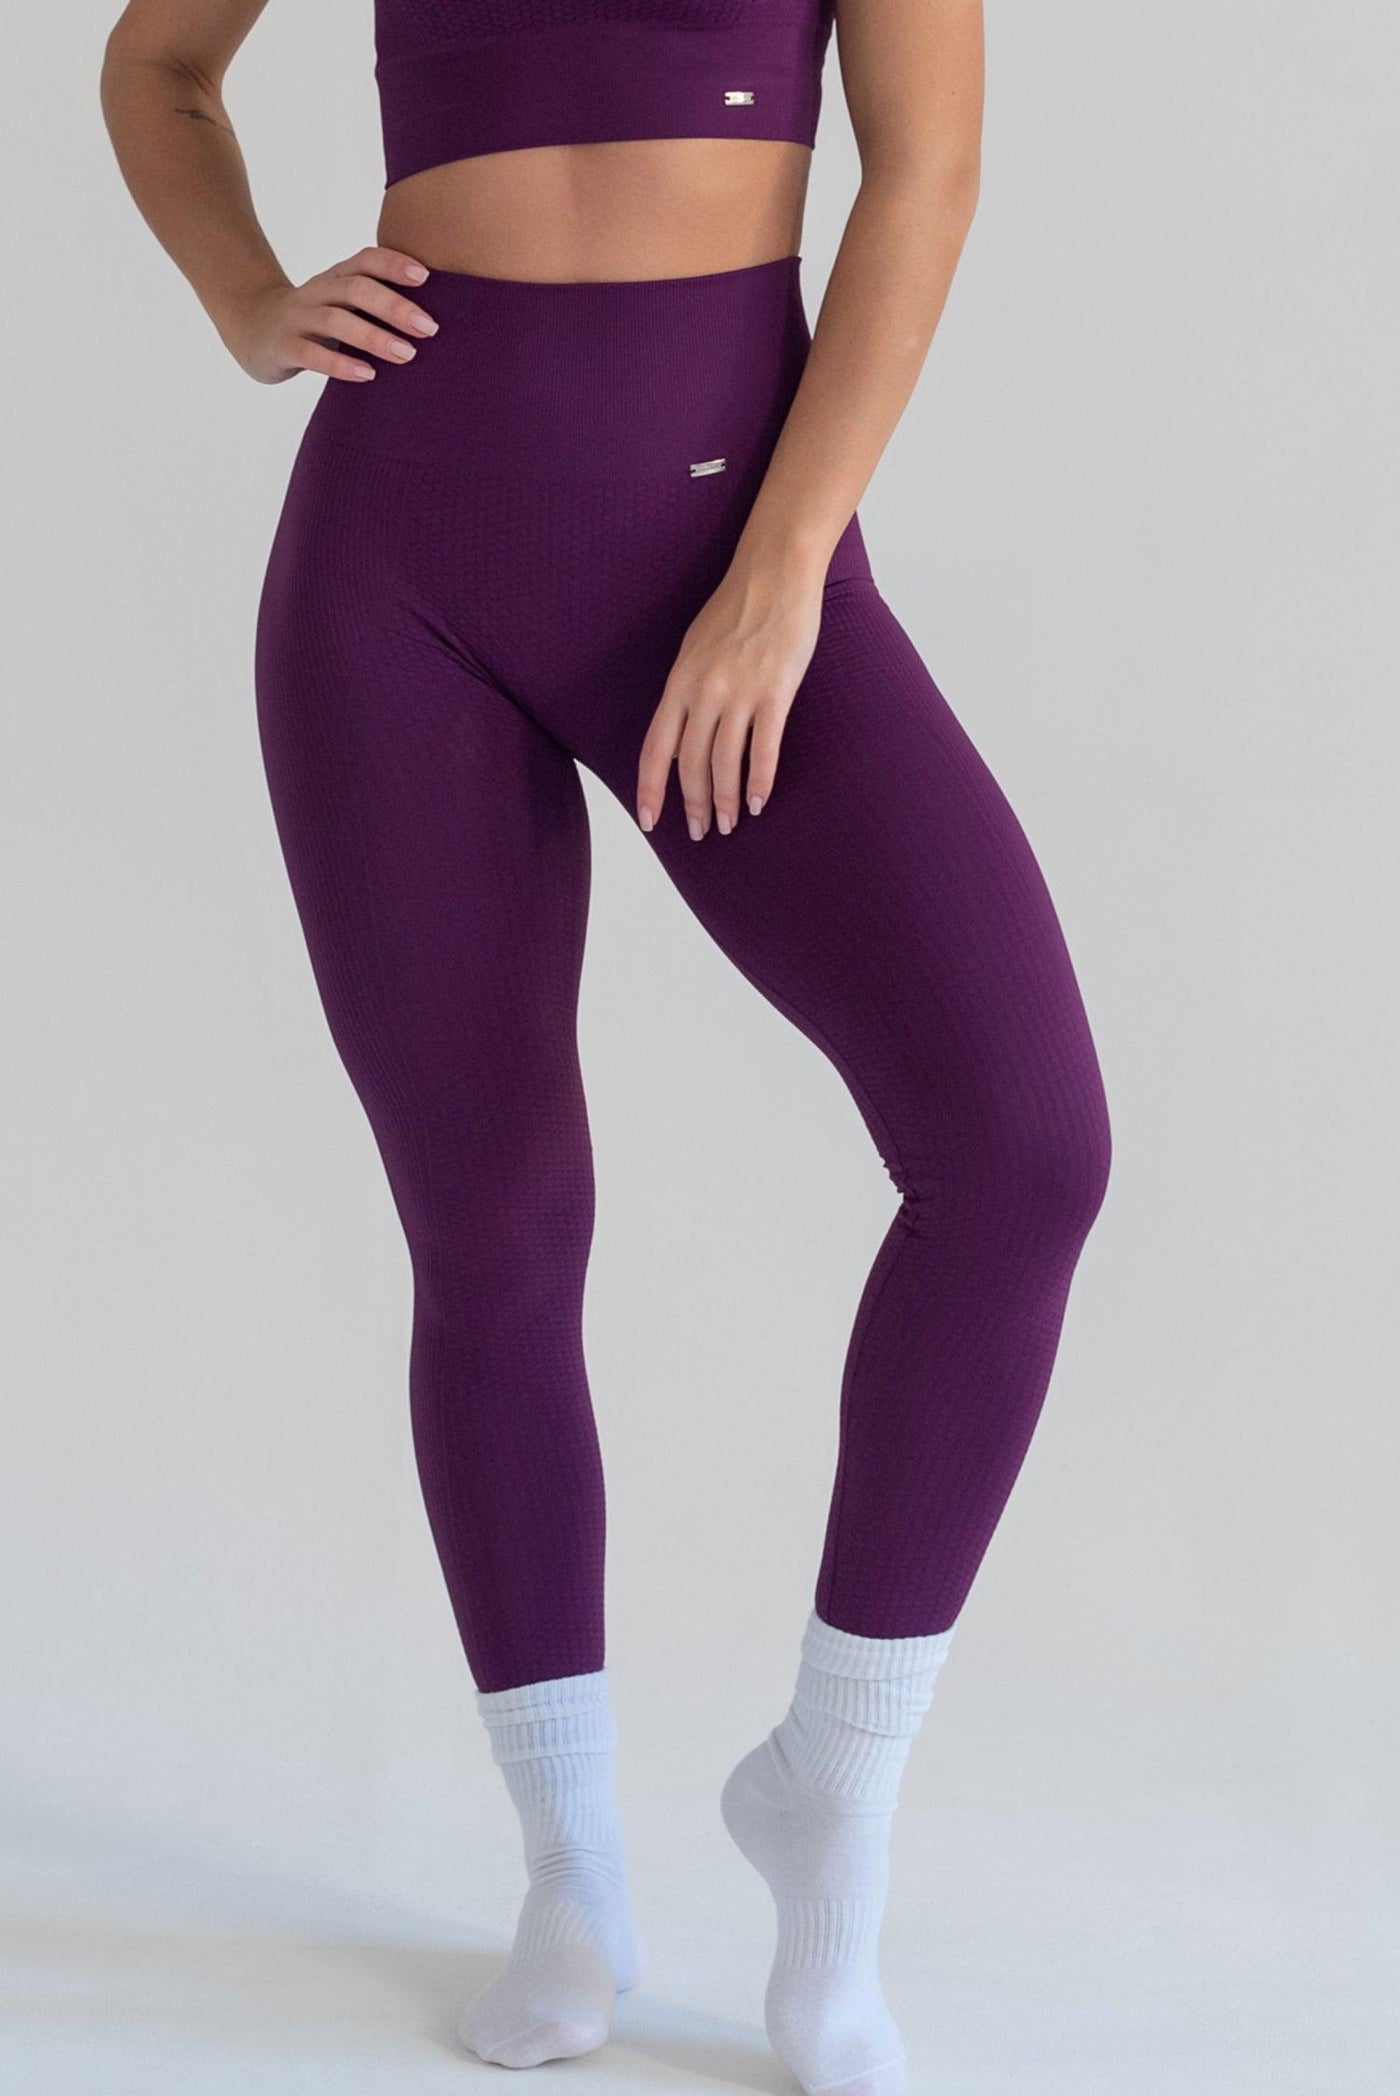 Flow Legging in Burgundy-Long Leggings-Store Clothing Sustainable Recycled Yoga Leggings Women On-line Barcelona Believe Athletics Sustainable Recycled Yoga Clothes